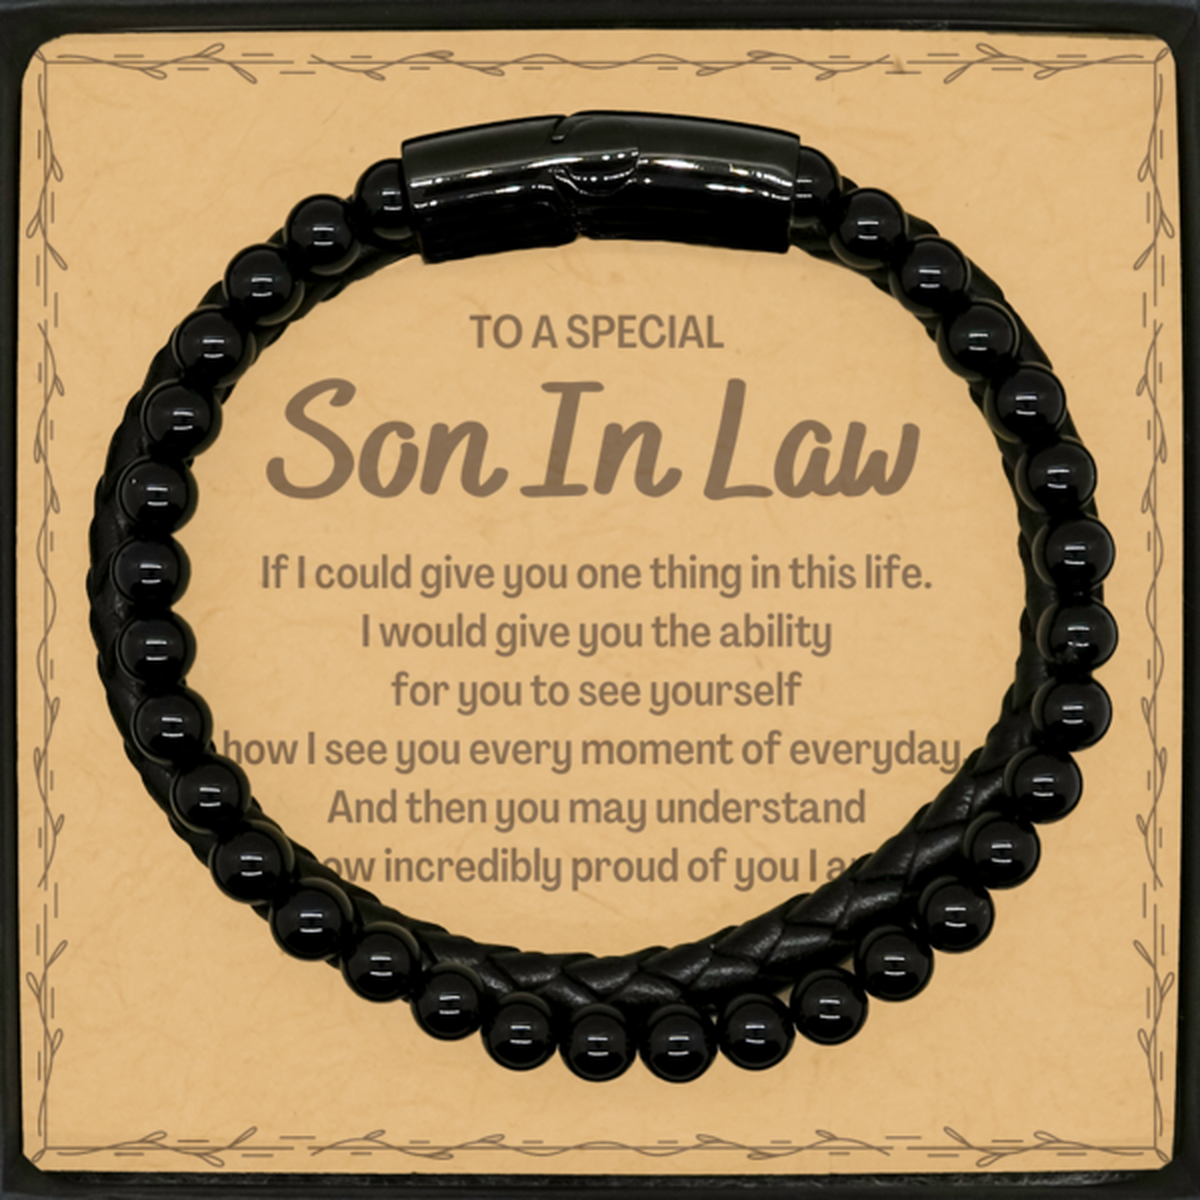 To My Son In Law Stone Leather Bracelets, Gifts For Son In Law Message Card, Inspirational Gifts for Christmas Birthday, Epic Gifts for Son In Law To A Special Son In Law how incredibly proud of you I am